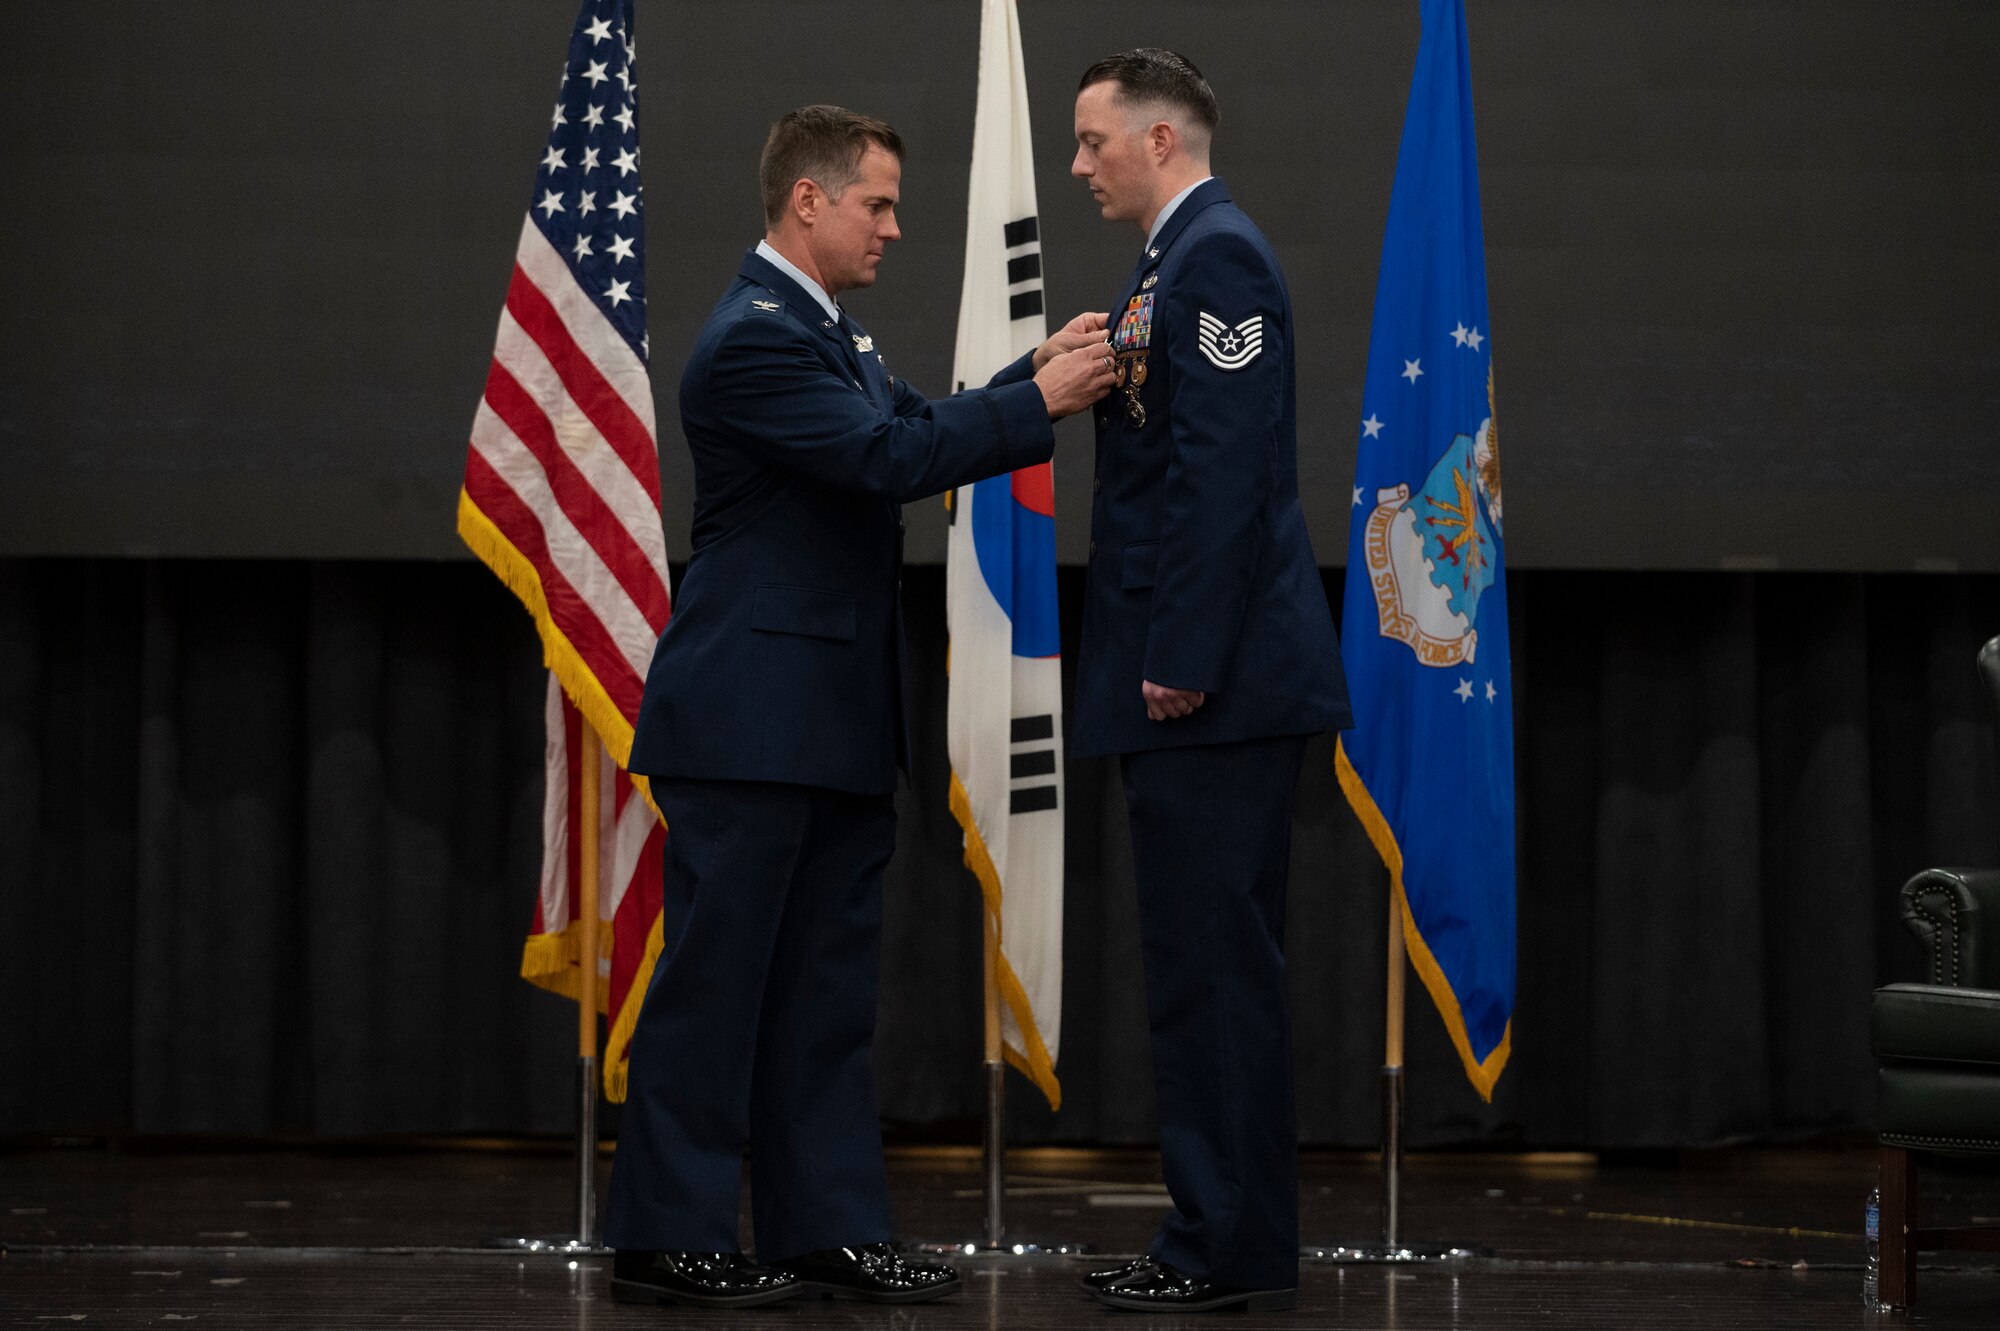 U.S. Air Force Col. Joshua Wood, 51st Fighter Wing commander, presents U.S. Air Force Tech. Sgt. Jordan Locke, 51st Security Forces Squadron flight sergeant, the Bronze Star with Valor during a presentation ceremony at Osan Air Base, Republic of Korea, Oct. 12, 2022.